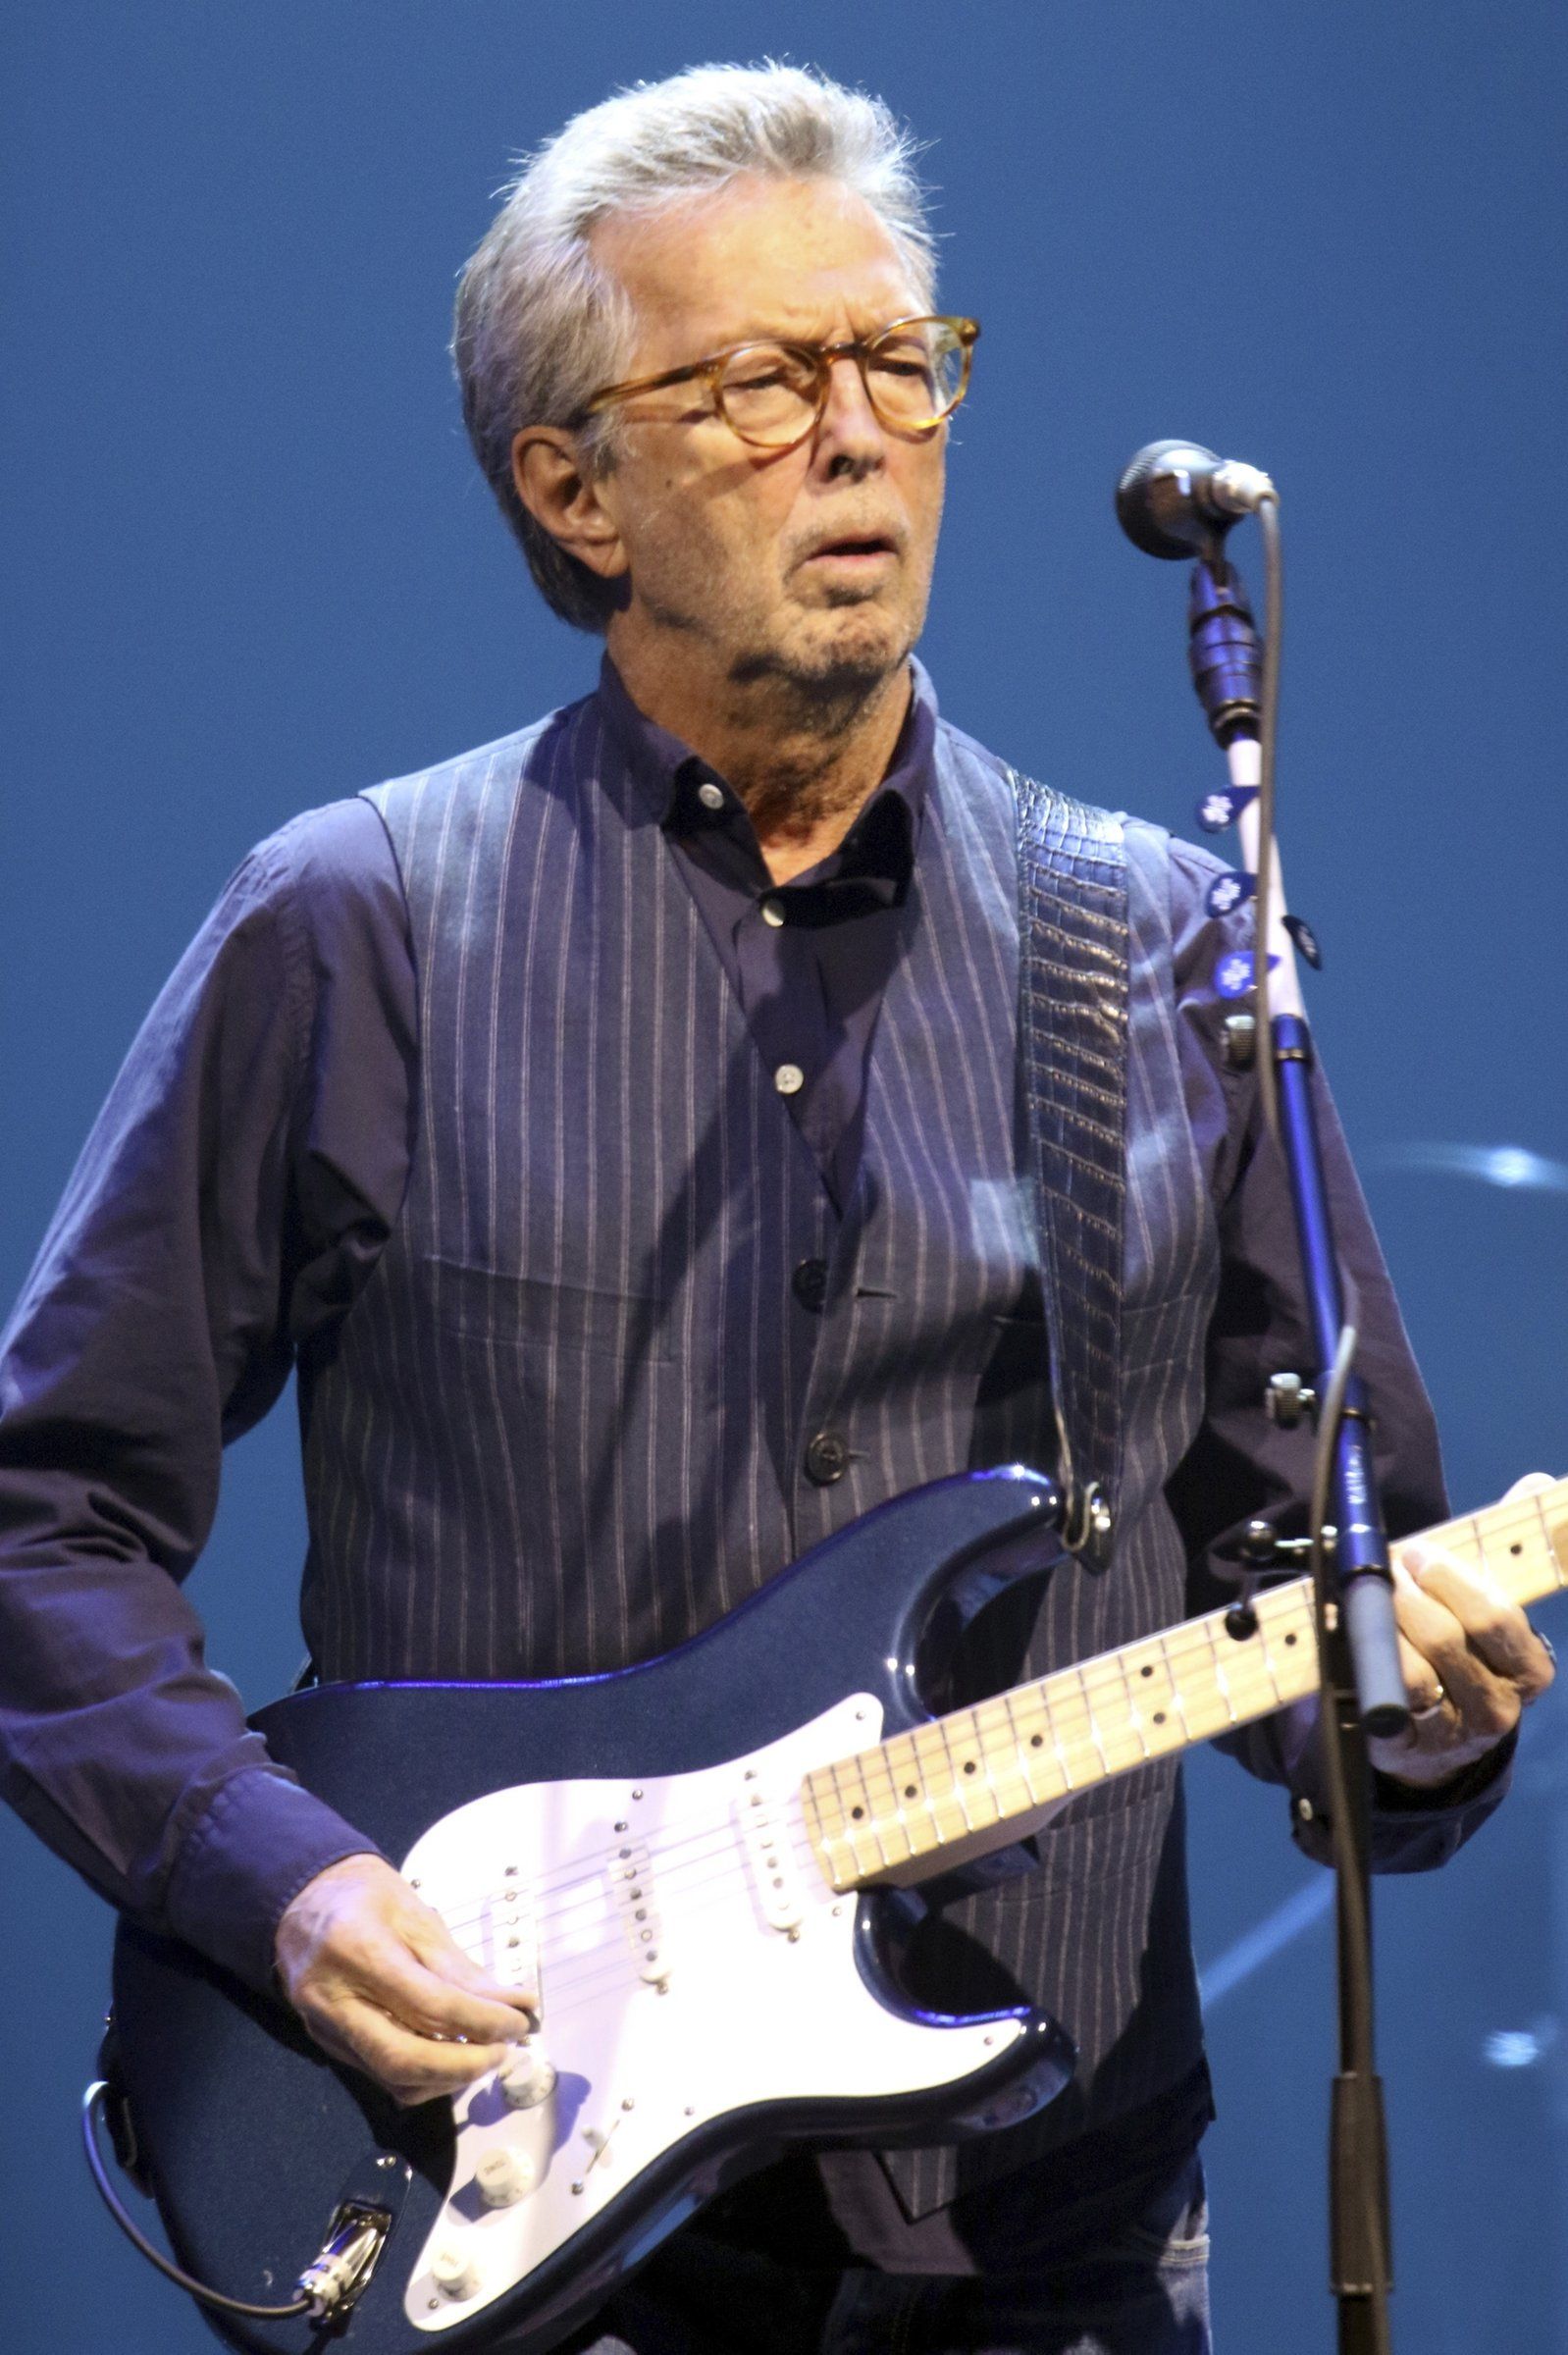 Eric Clapton sued a woman who listed a bootleg CD on eBay for $11 